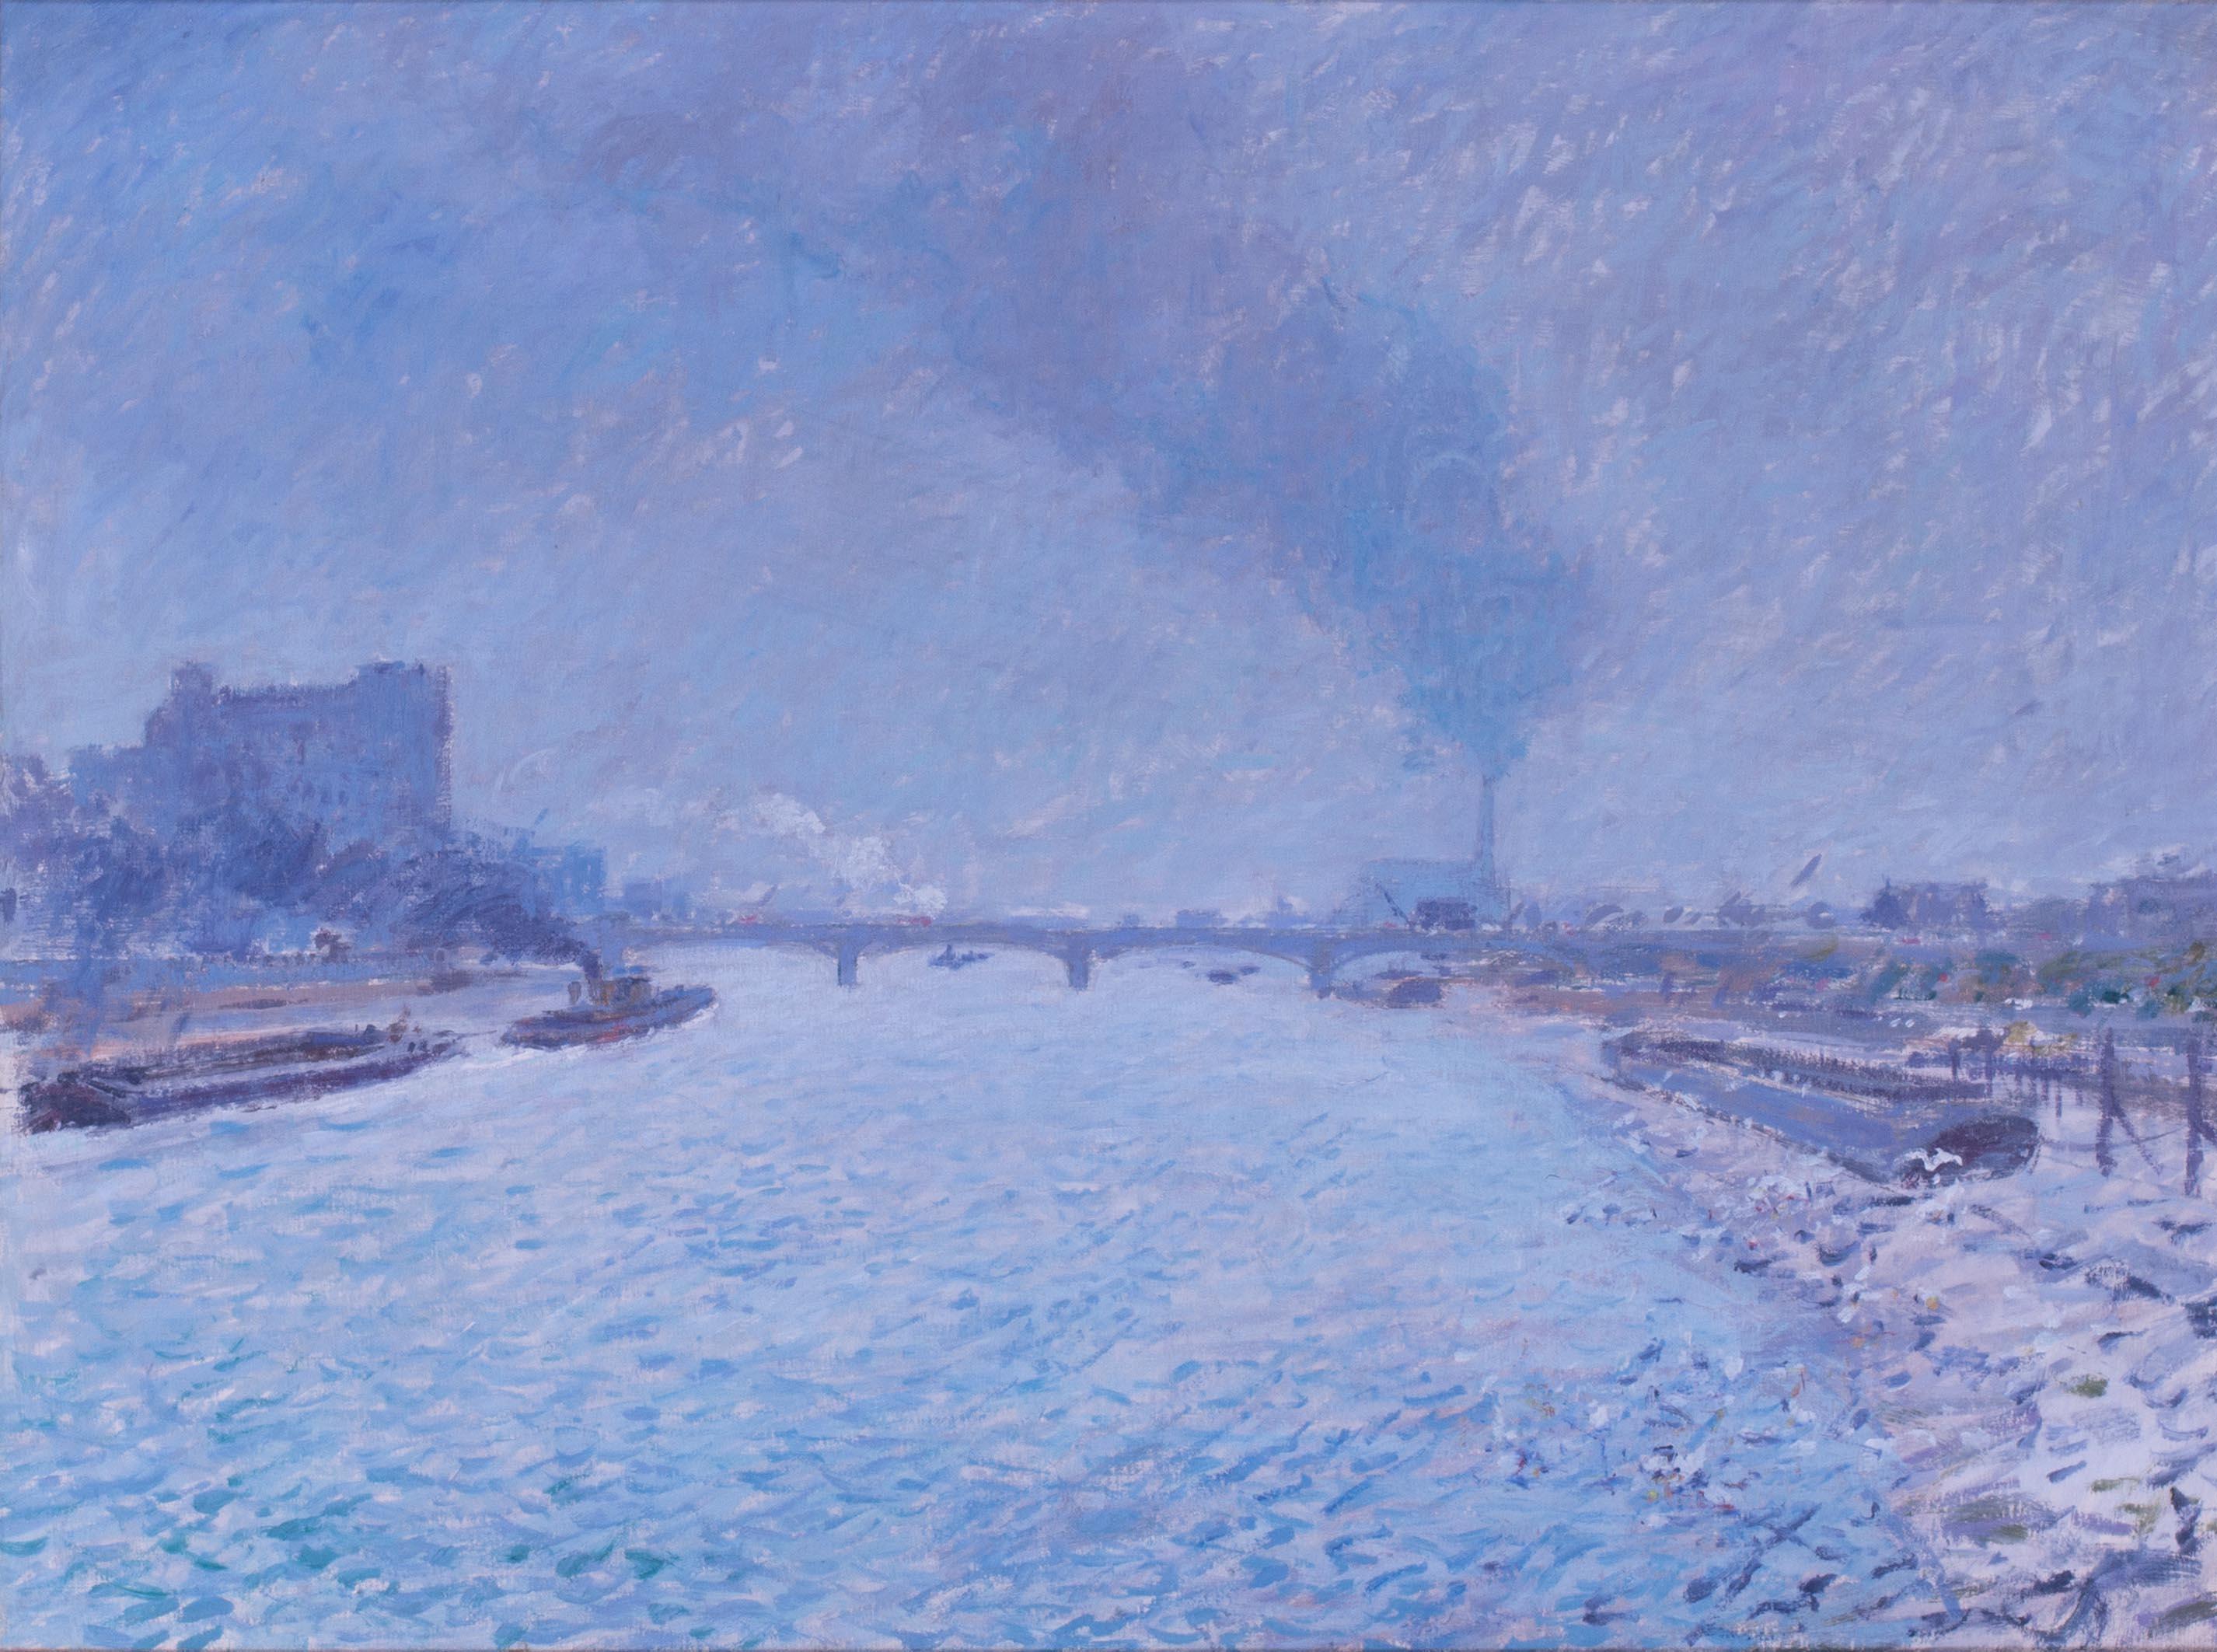 20th Century British Impressionist painting of the Thames, London, in blue tones - Painting by Derick Mynott 